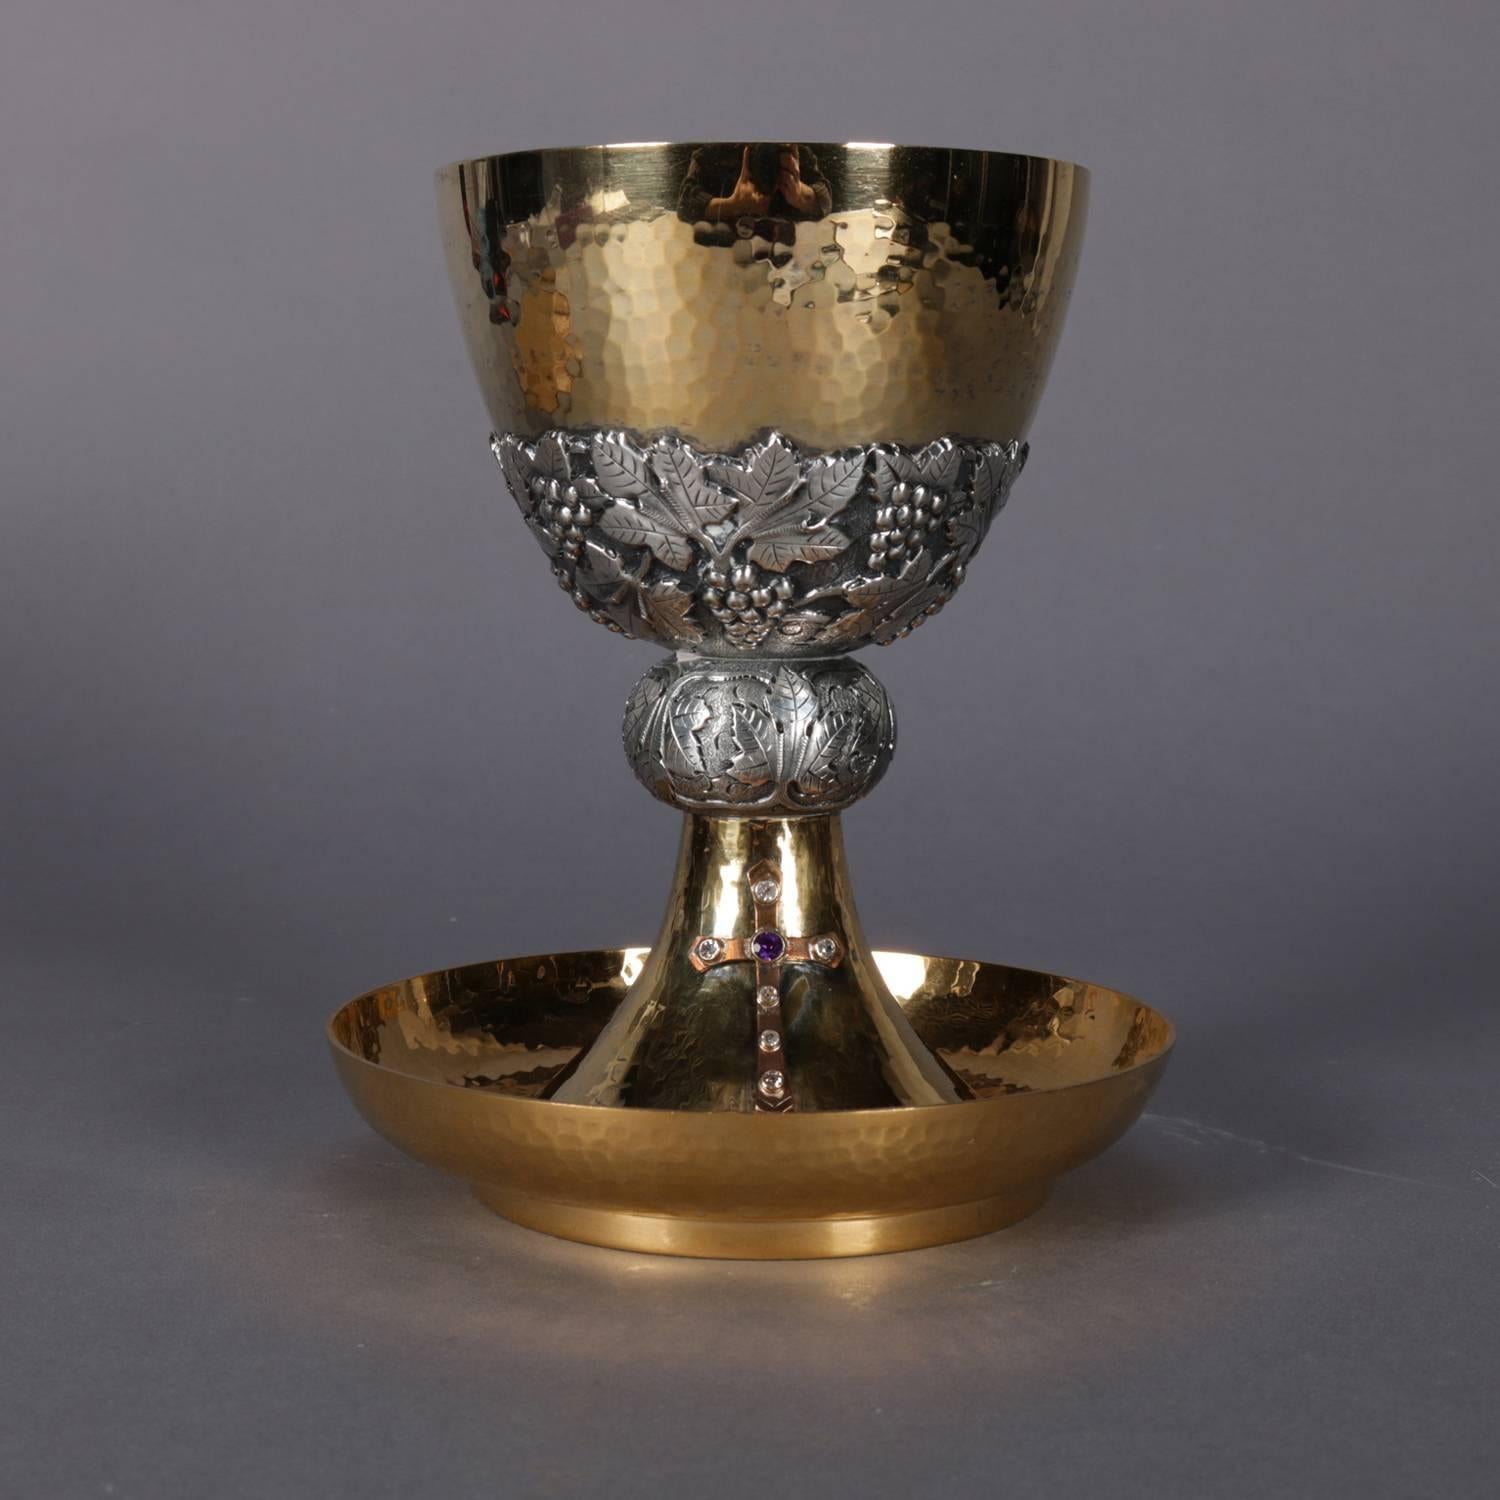 20th Century Jeweled Hand-Hammered Brass Communion Chalice with Cross, Made in Spain